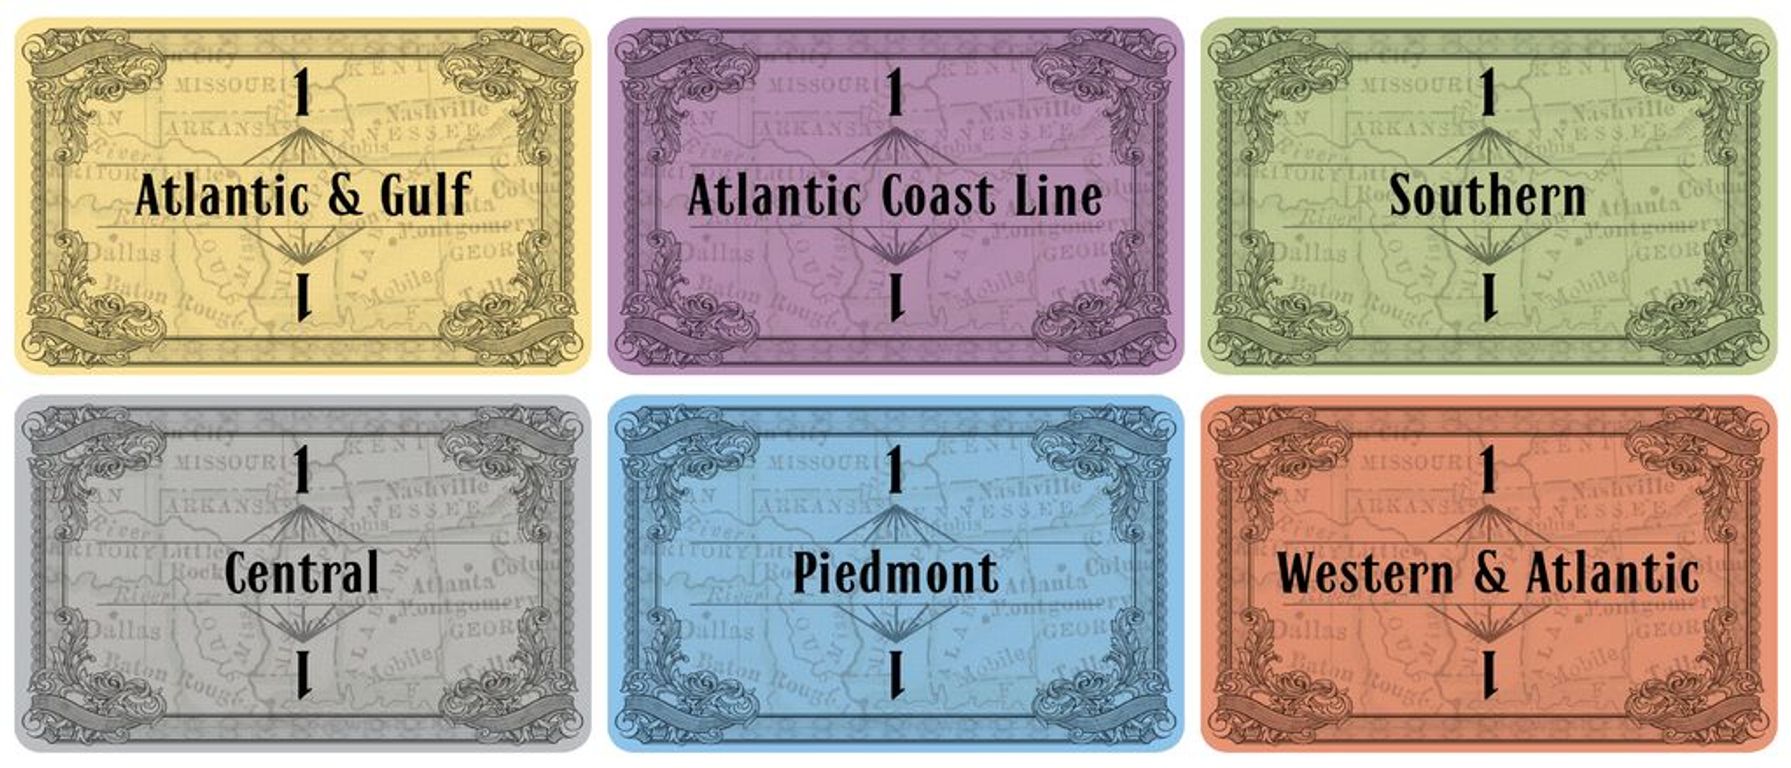 Southern Rails cards